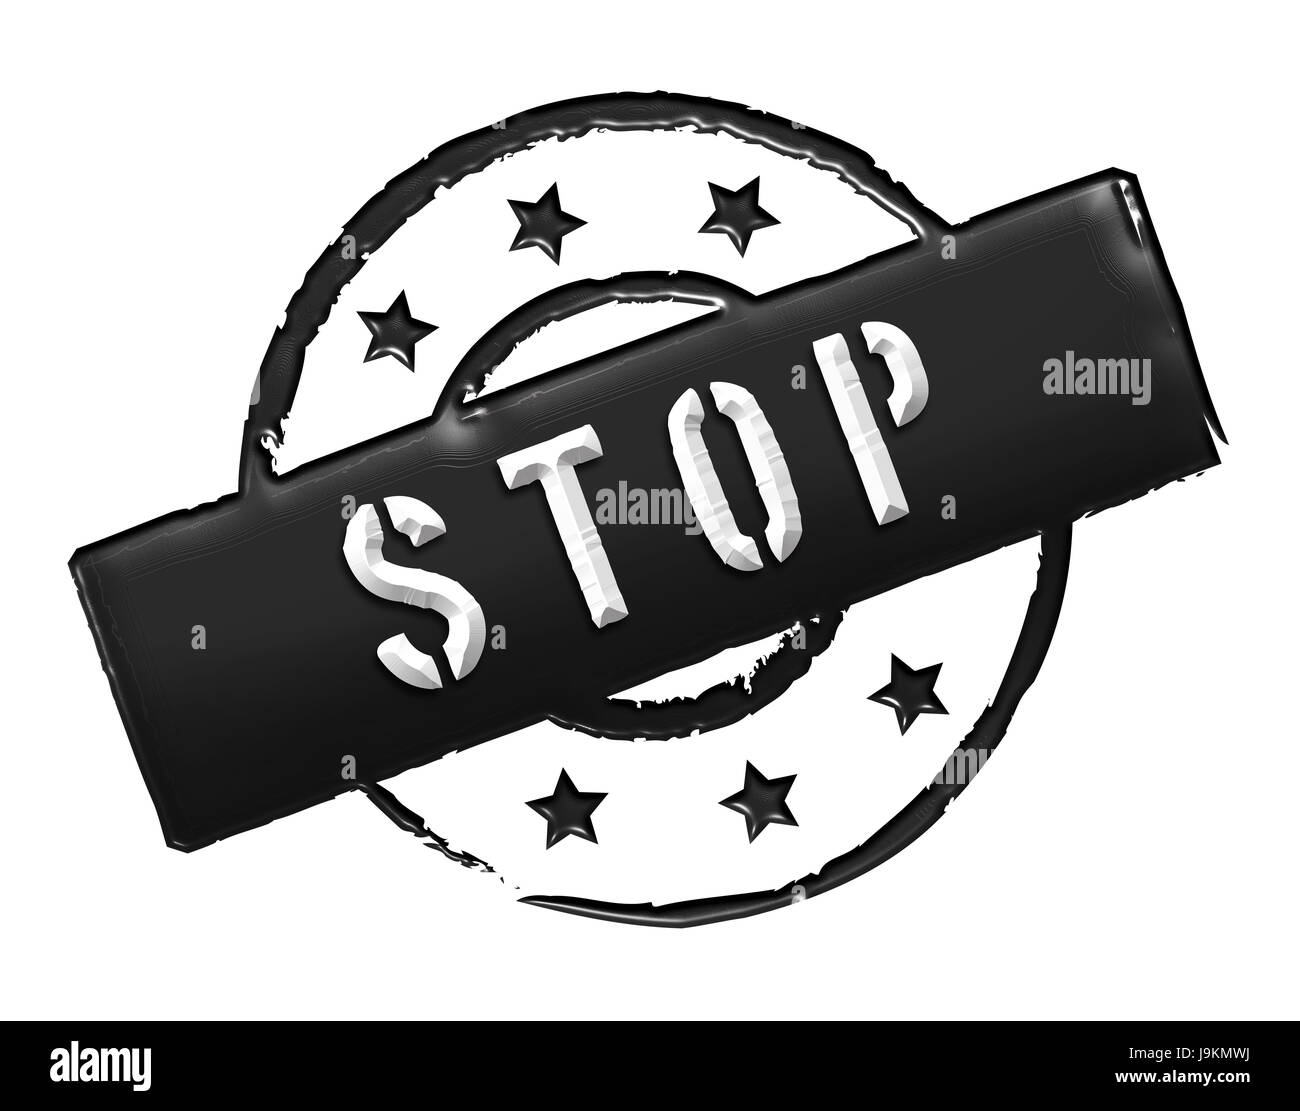 end, stop, stops, aborting, isolated, caution, no, end, important, stop, Stock Photo